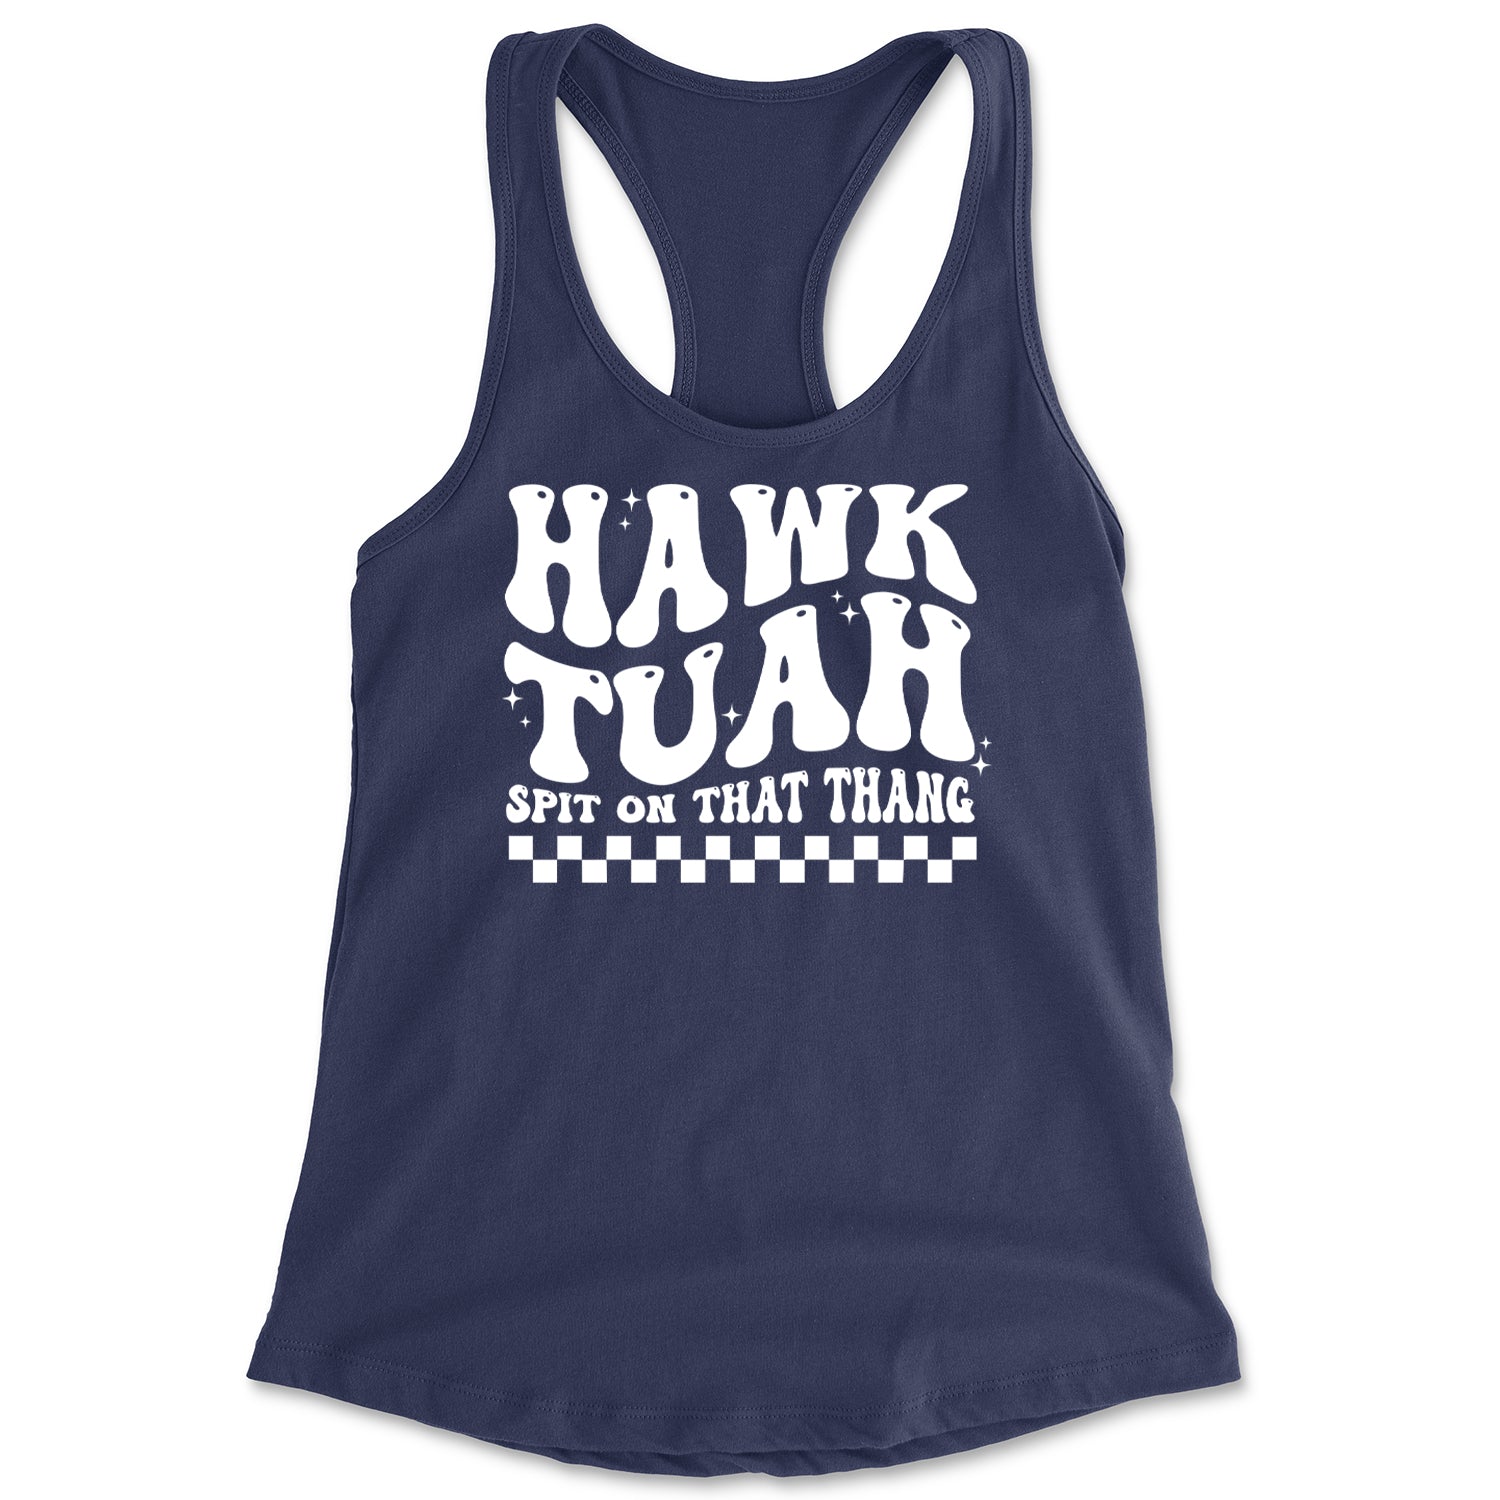 Hawk Tuah Spit On That Thang Racerback Tank Top for Women Navy Blue